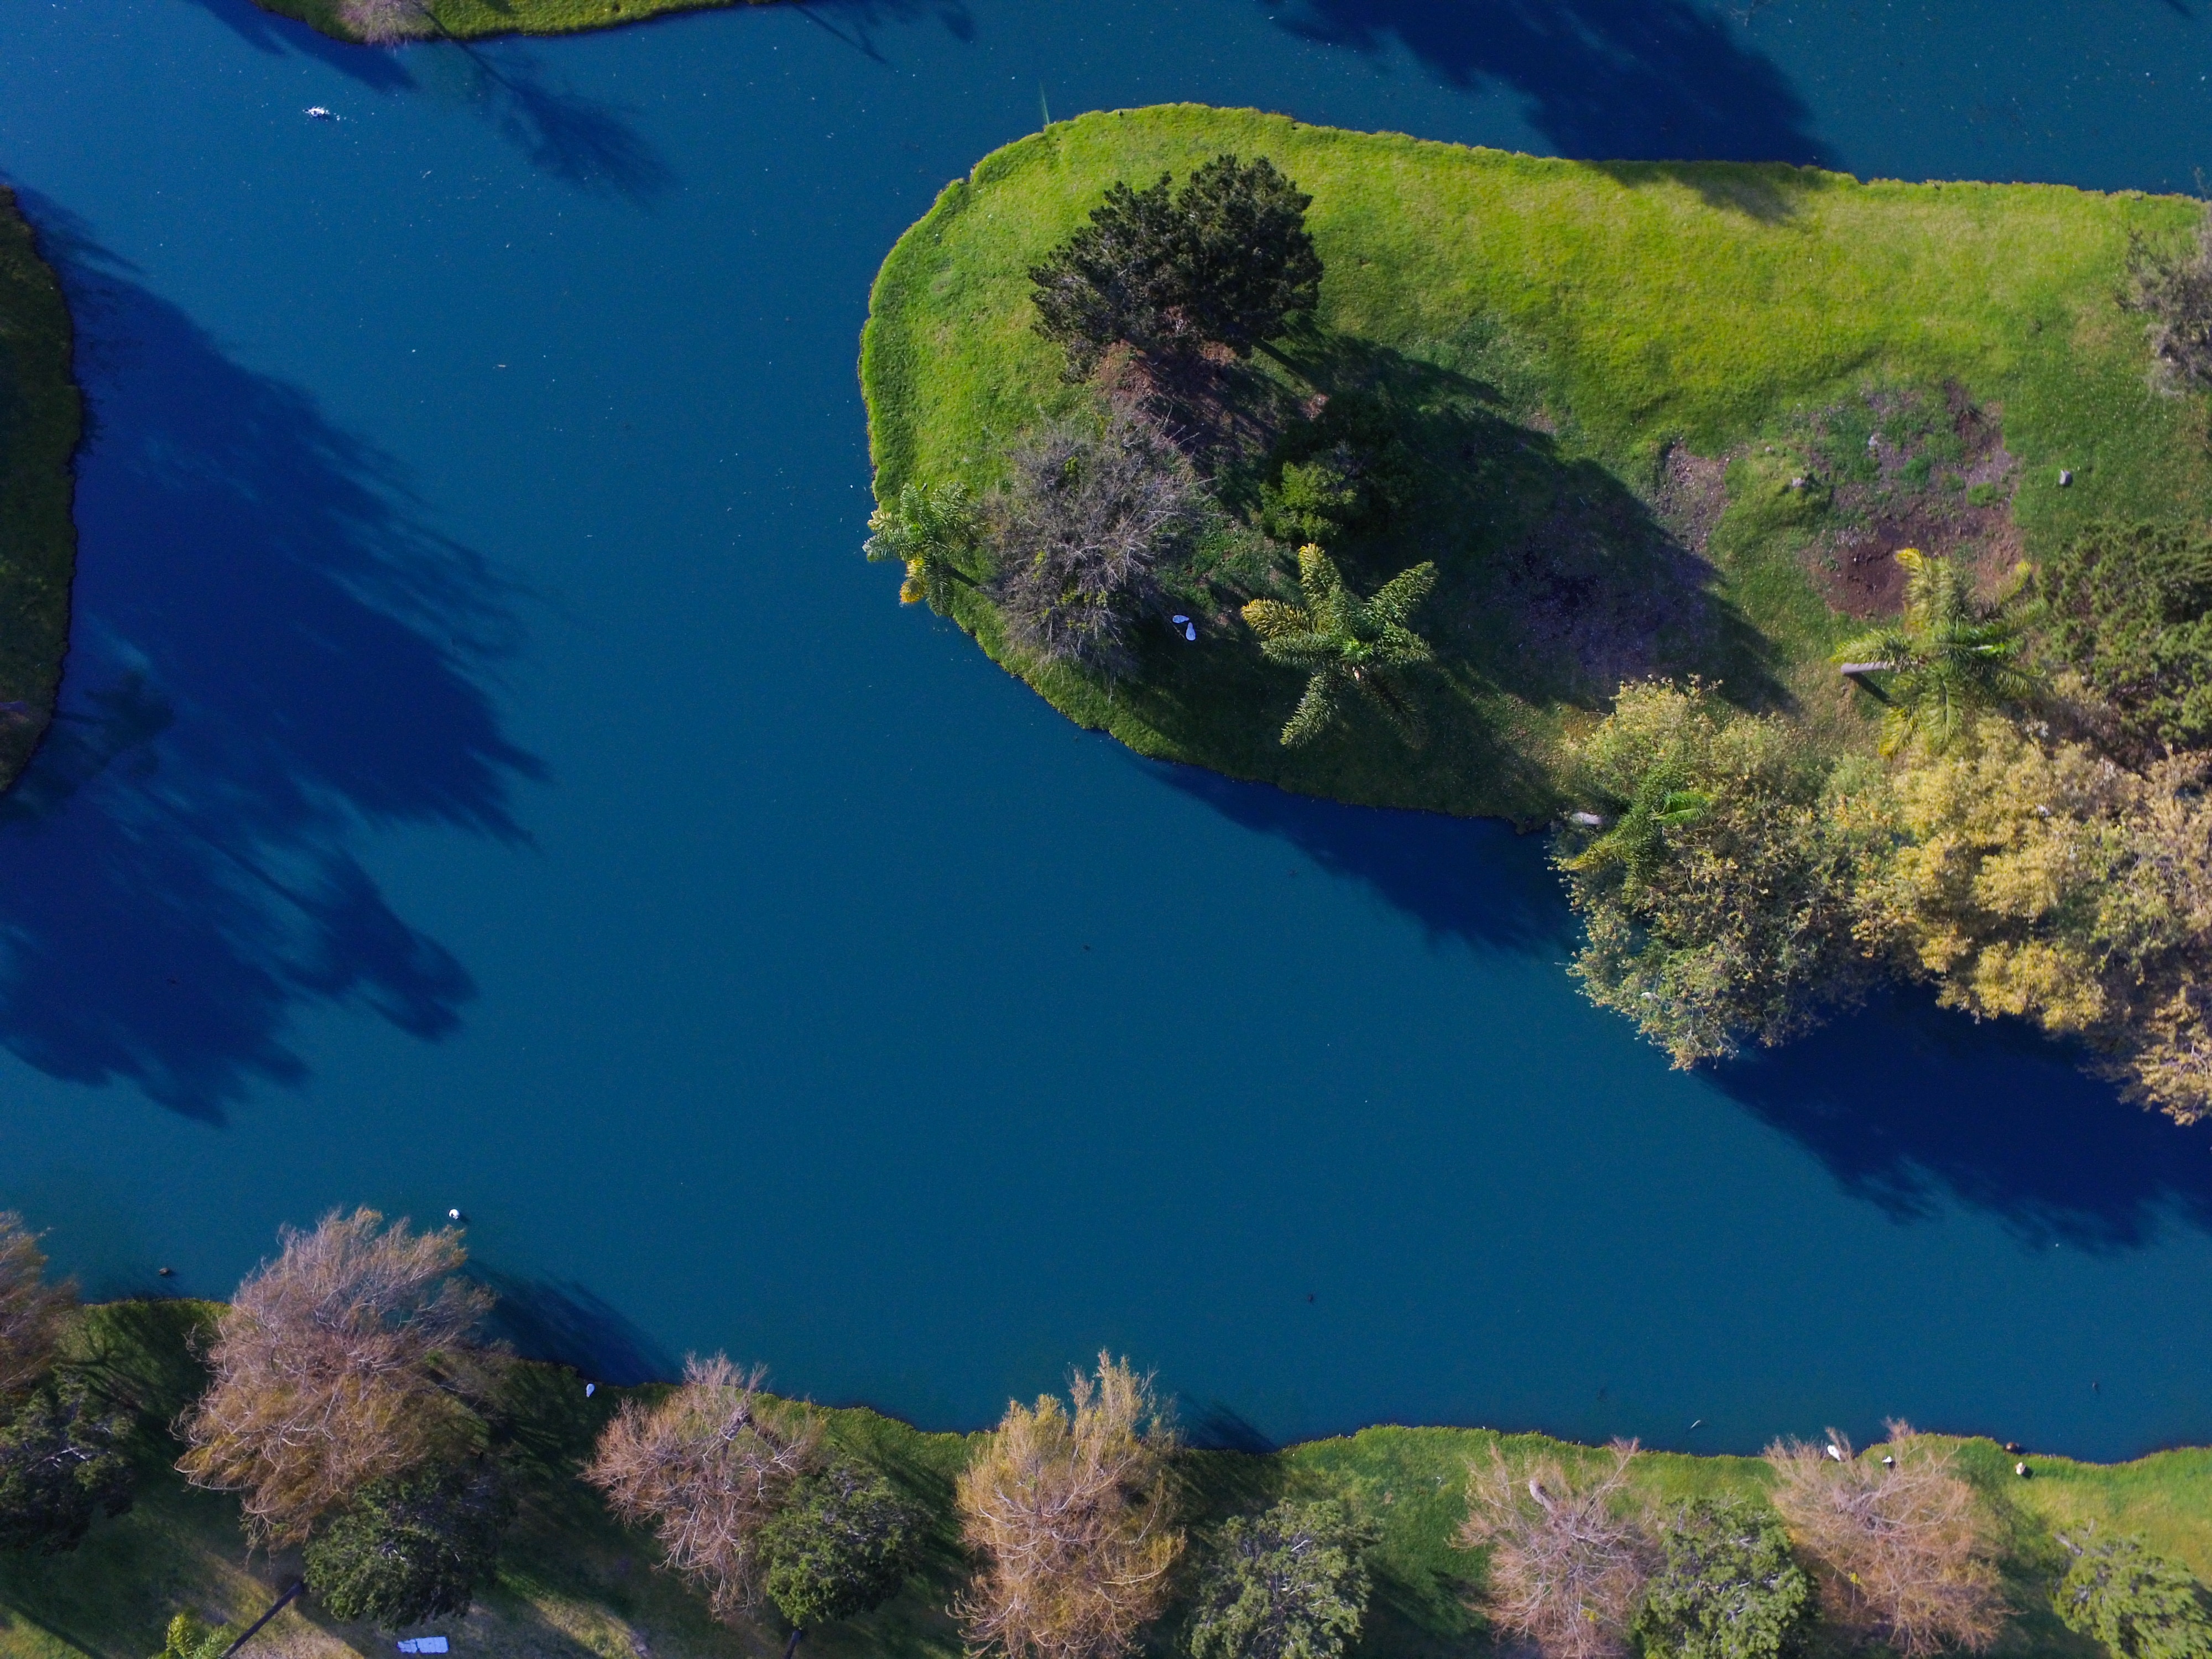 aerial view of tree on grass field surrounded by water during daytime